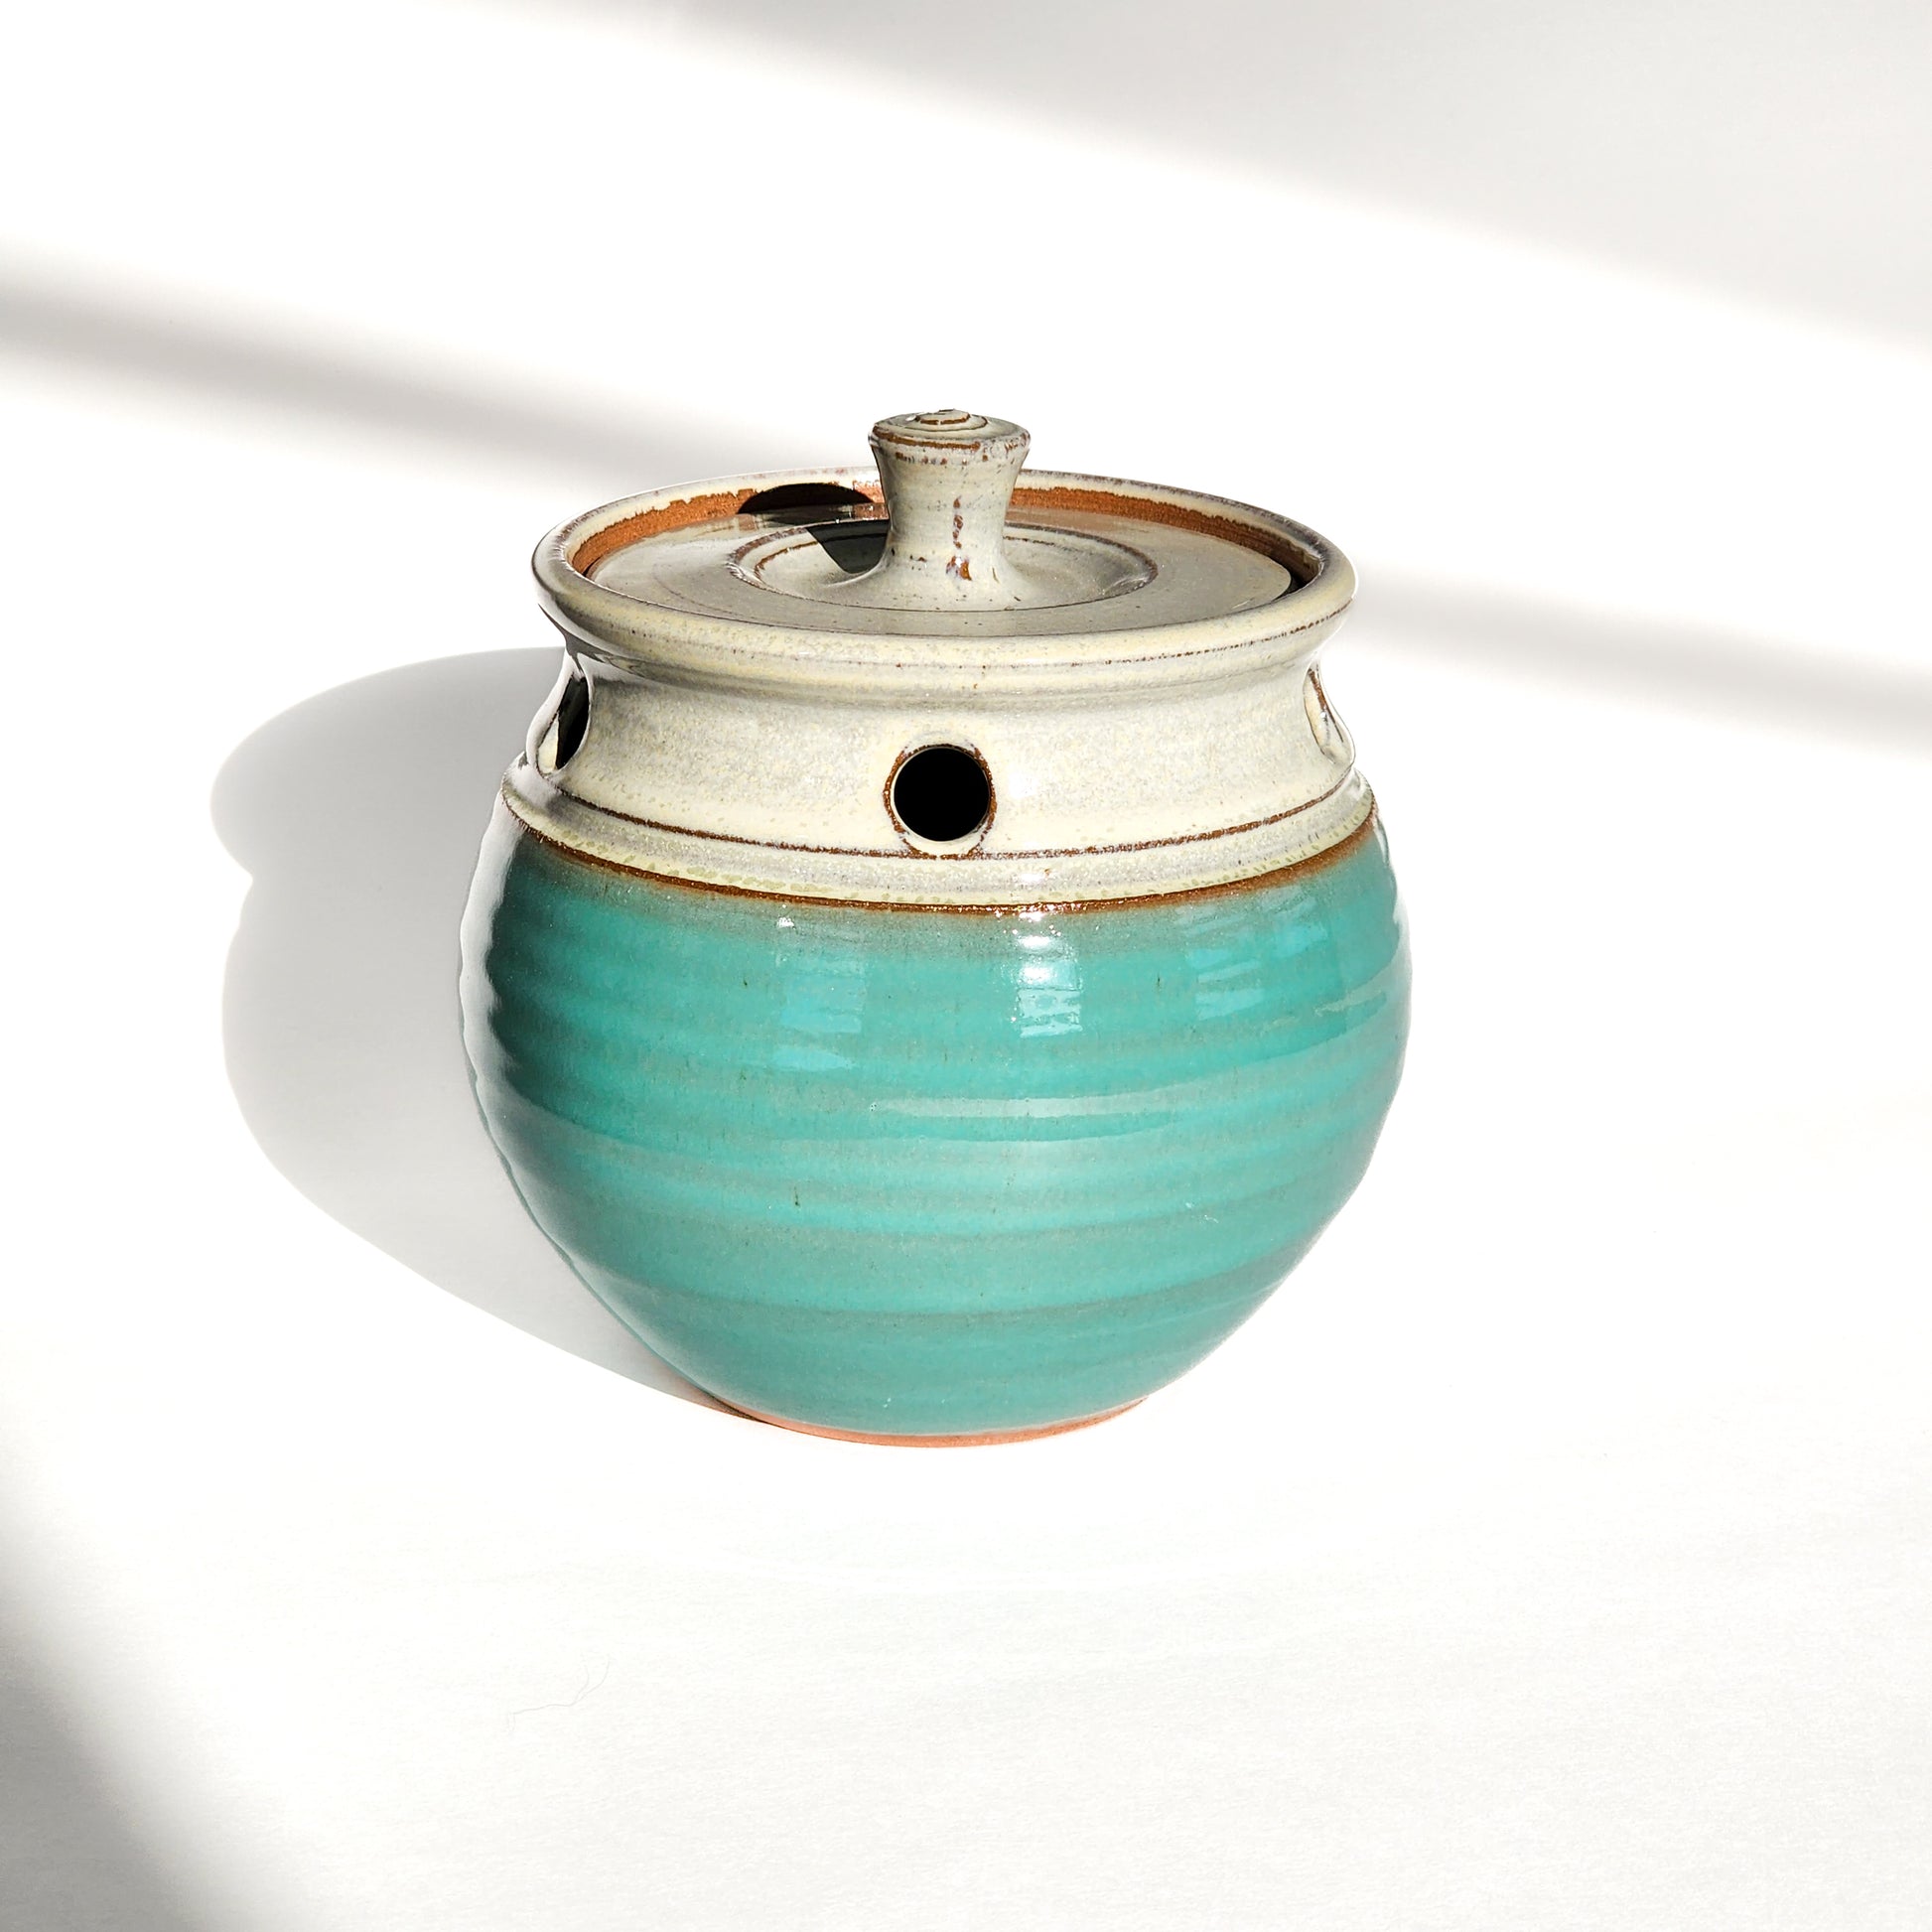 Image: A sky blue ceramic garlic keeper, crafted to store garlic bulbs and enhance kitchen décor with its soothing color.